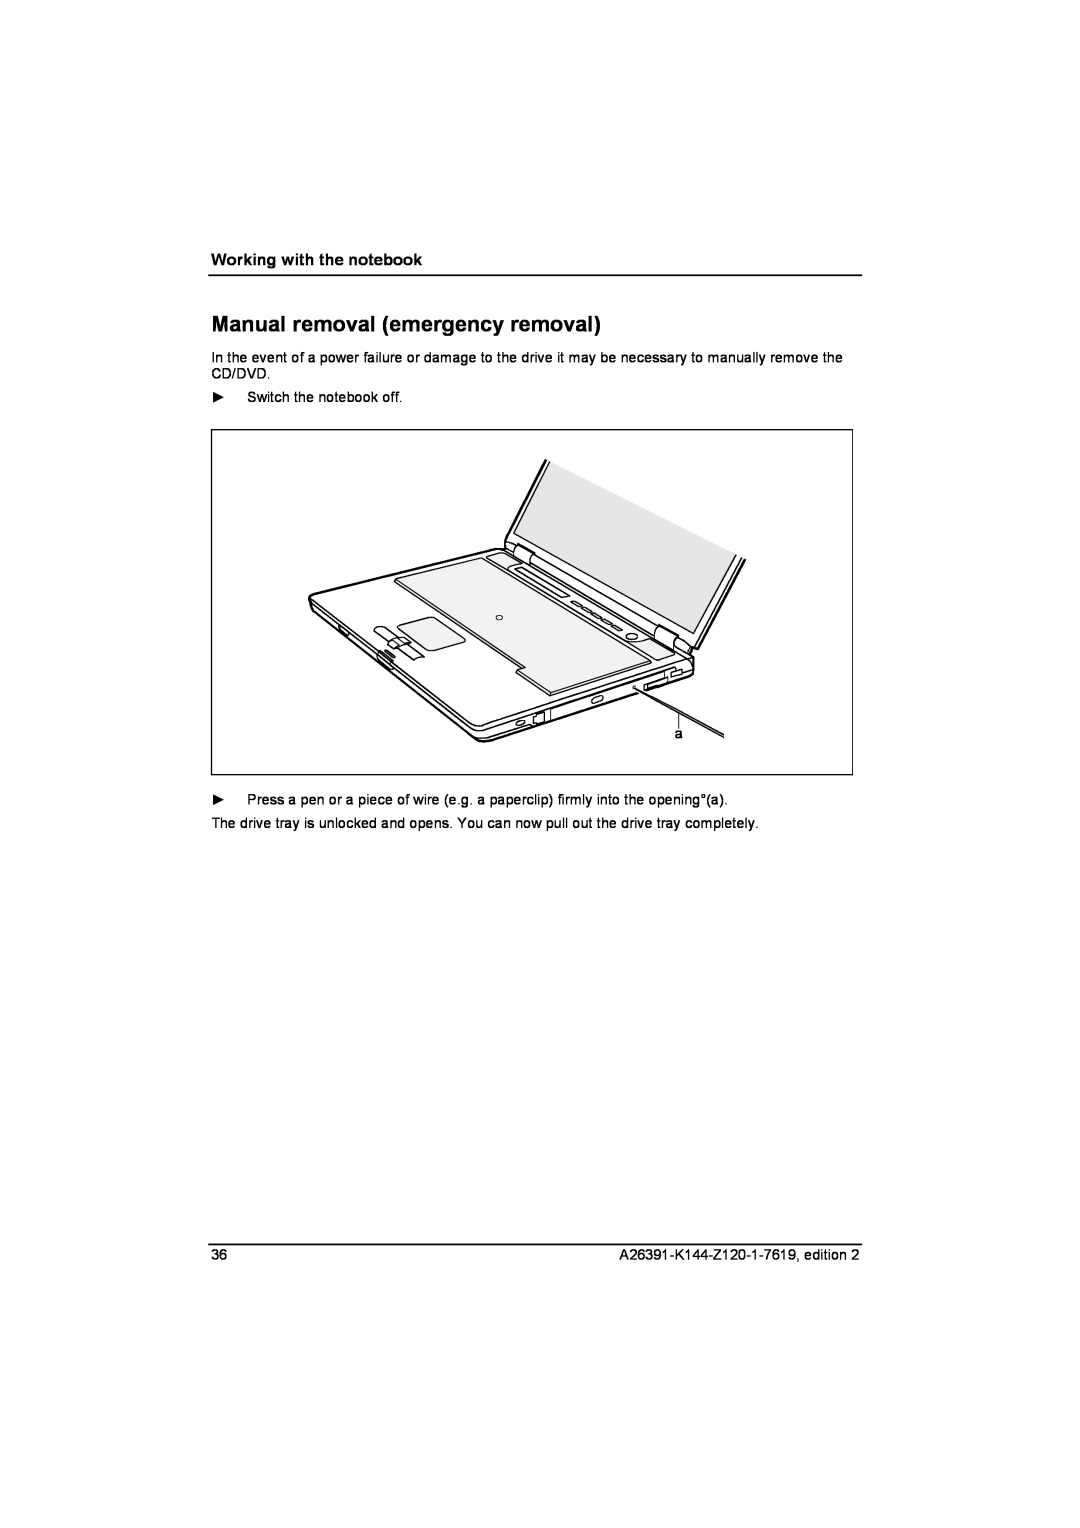 Fujitsu S SERIES manual Manual removal emergency removal, Working with the notebook, A26391-K144-Z120-1-7619, edition 